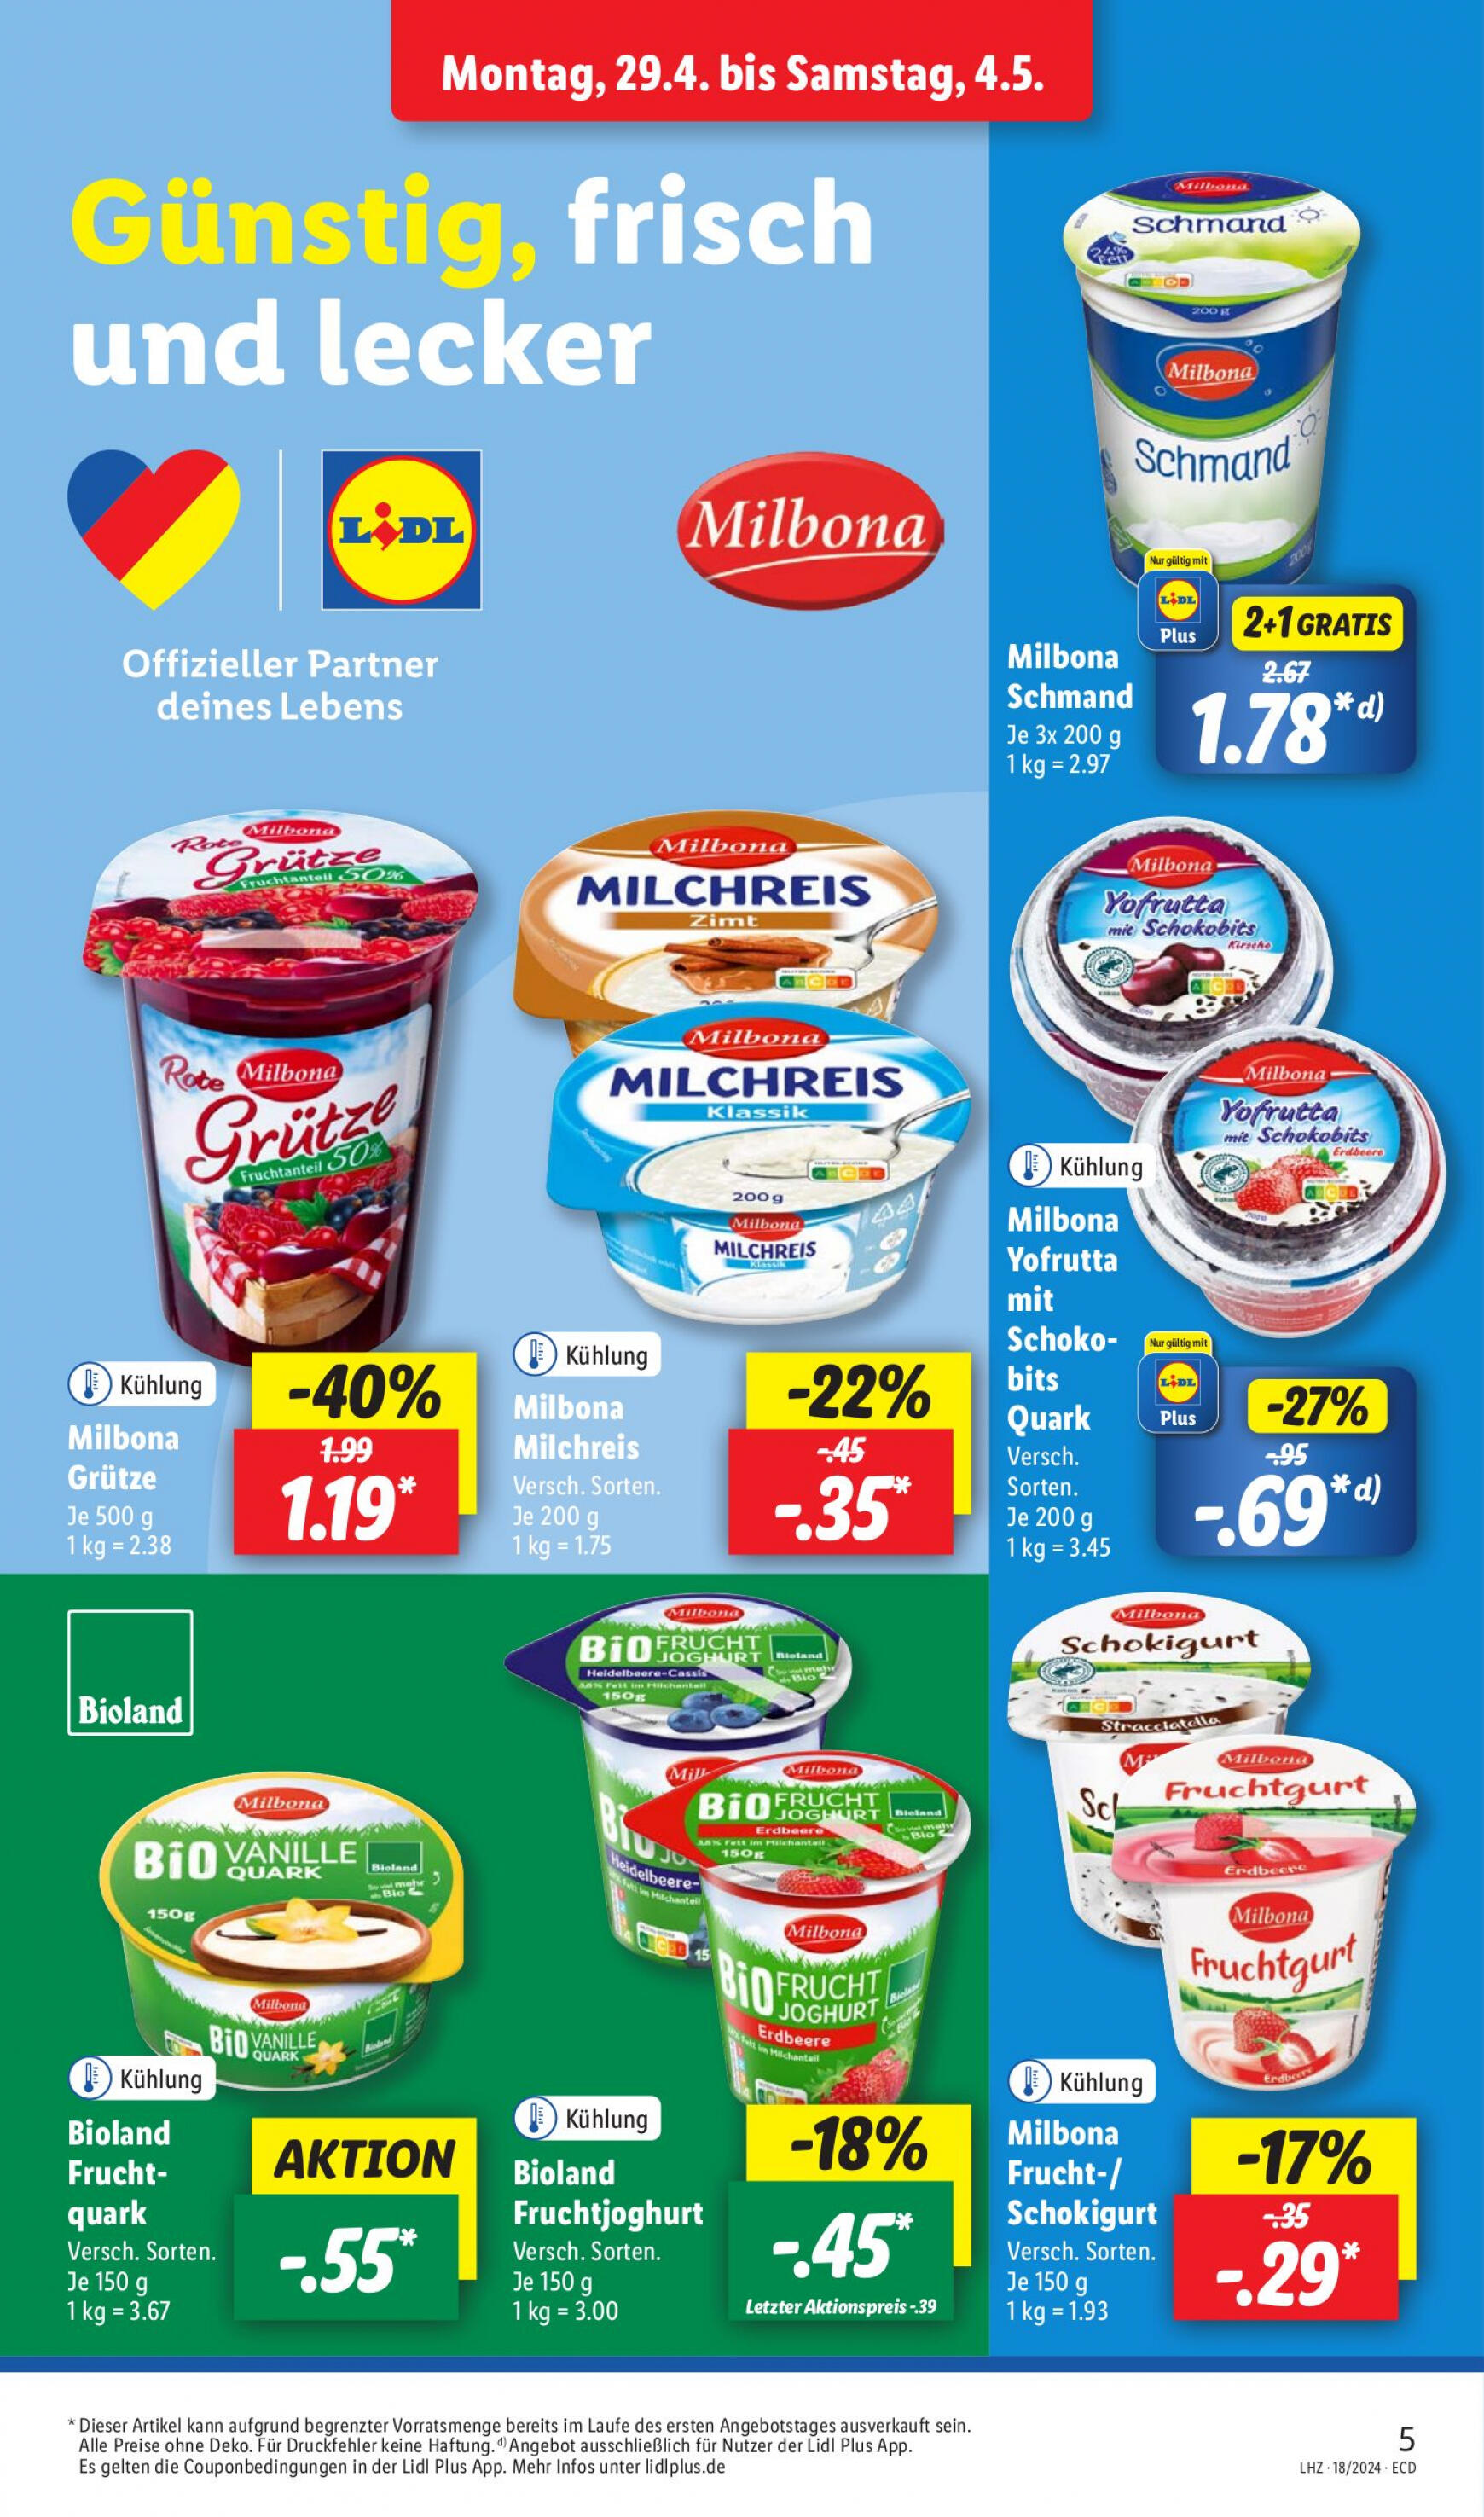 lidl - Flyer Lidl aktuell 29.04. - 04.05. - page: 7